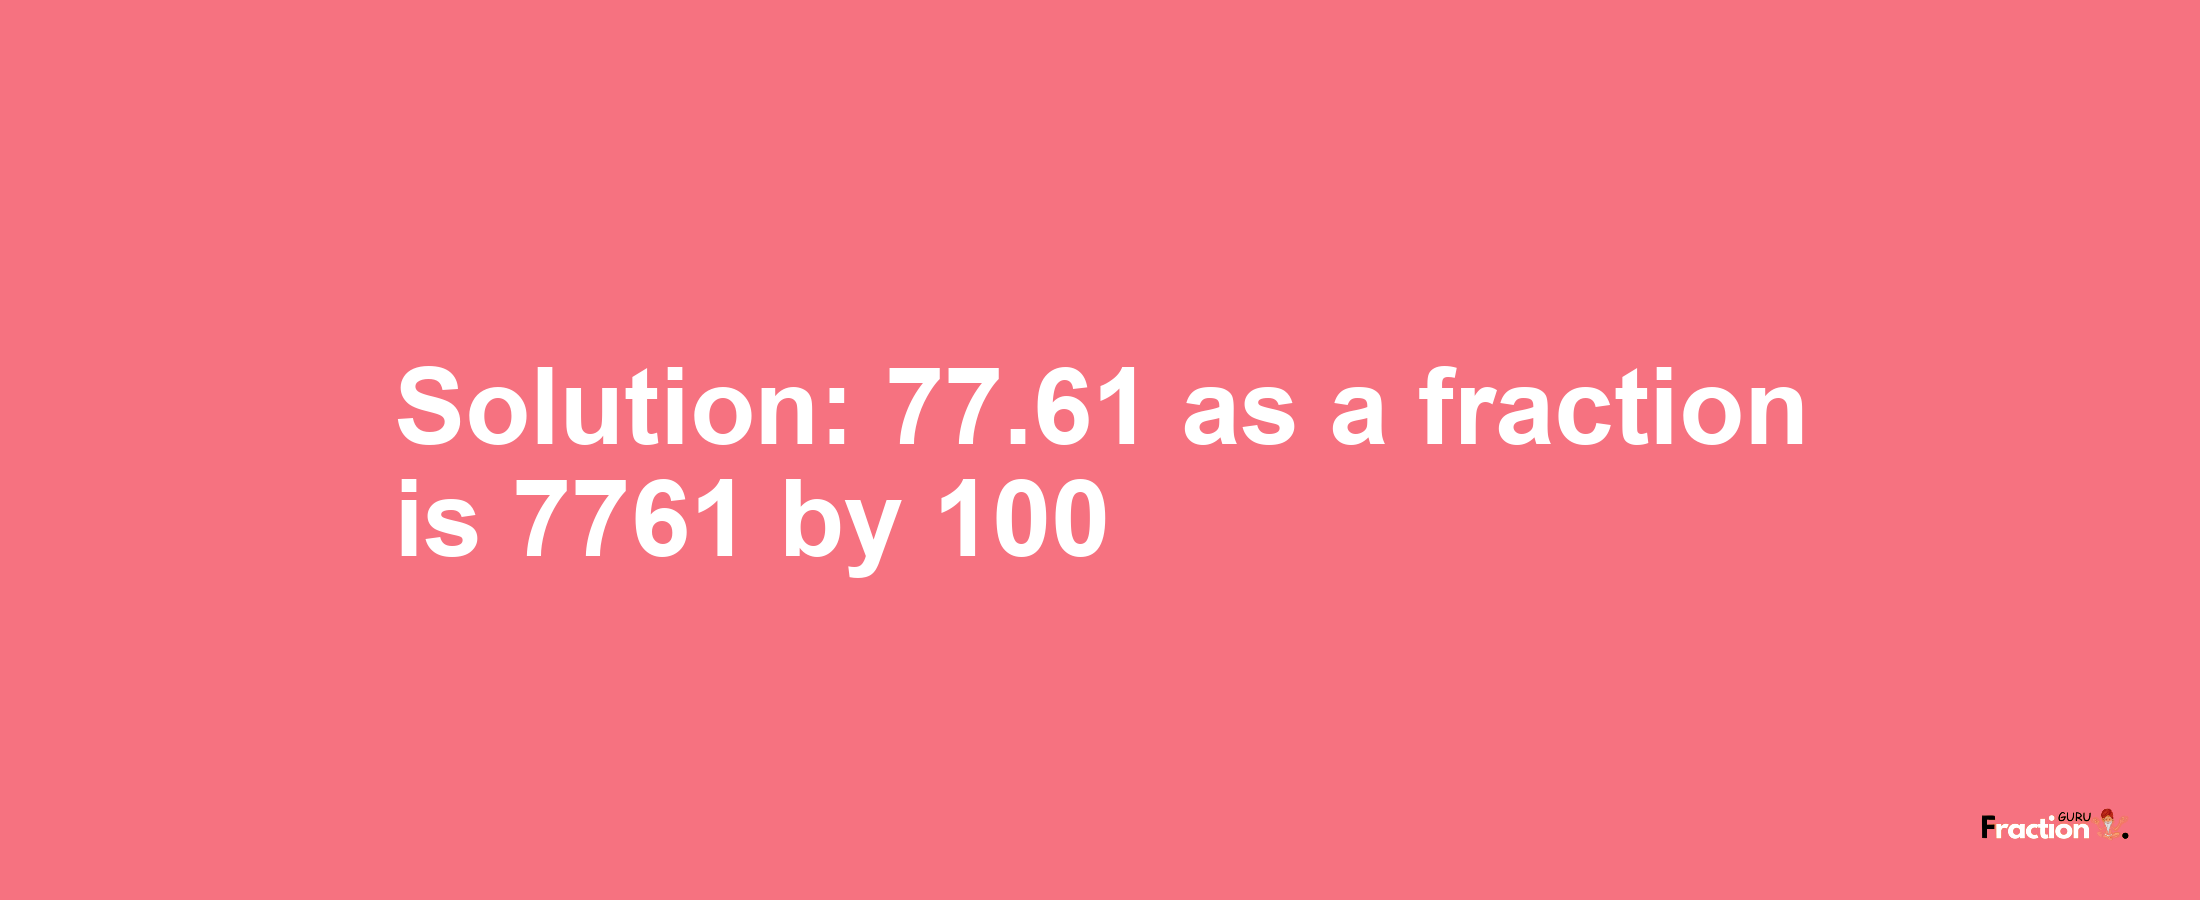 Solution:77.61 as a fraction is 7761/100